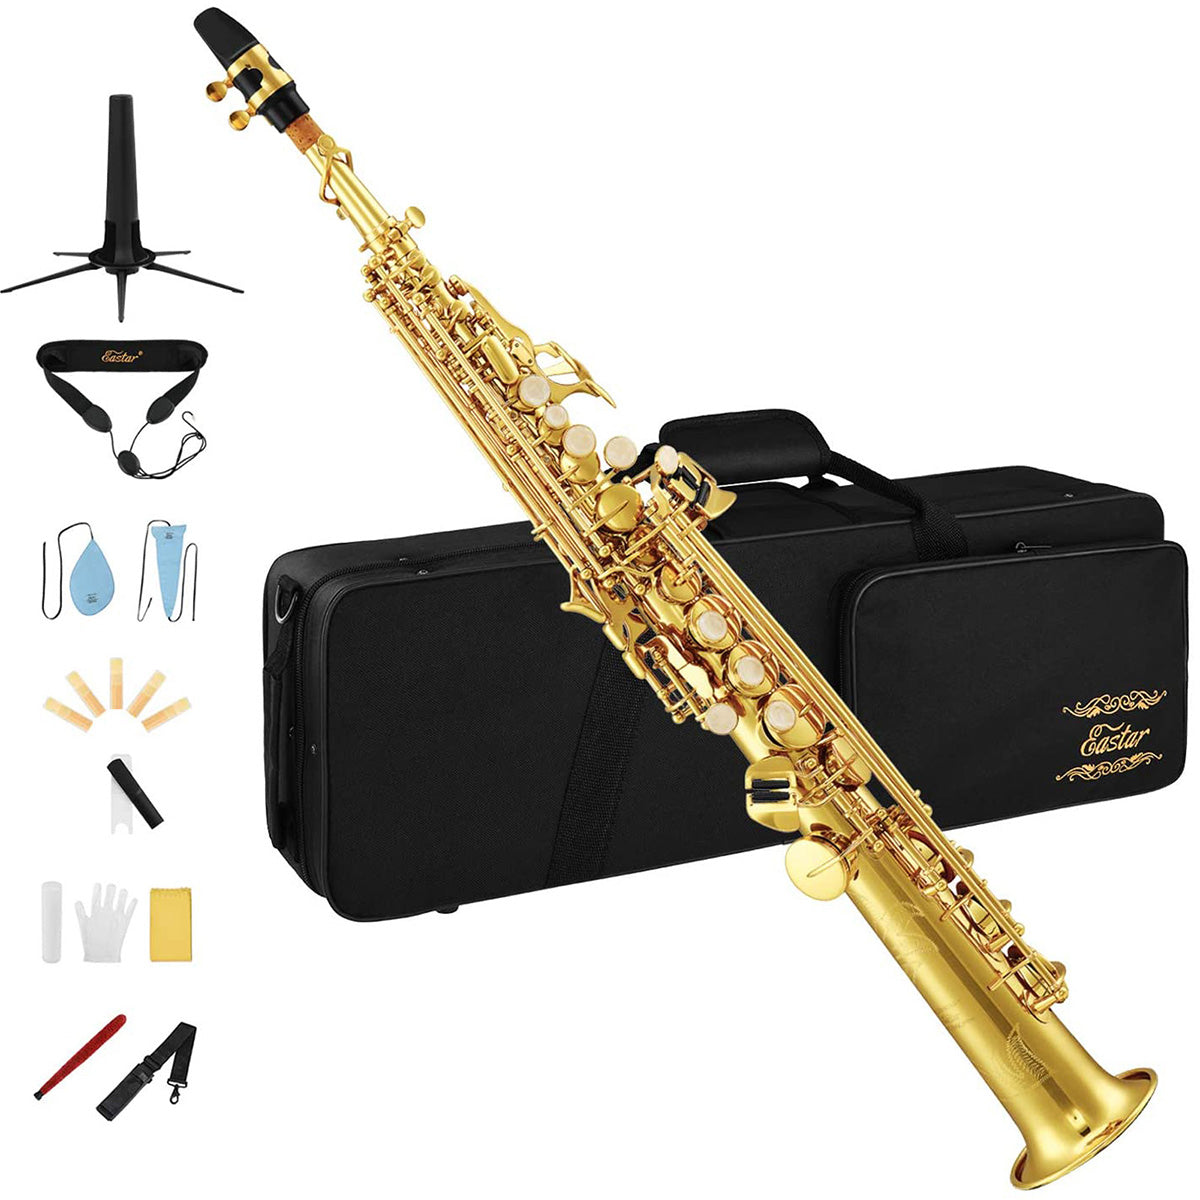 

Eastar SS-Ⅱ Students Bb Soprano Saxophone Gold Lacquer B Flat Beginners with Carrying Sax Case Mouthpiece Straps Gloves Reeds Stand Cork Grease Cleaning Cloth & Brush